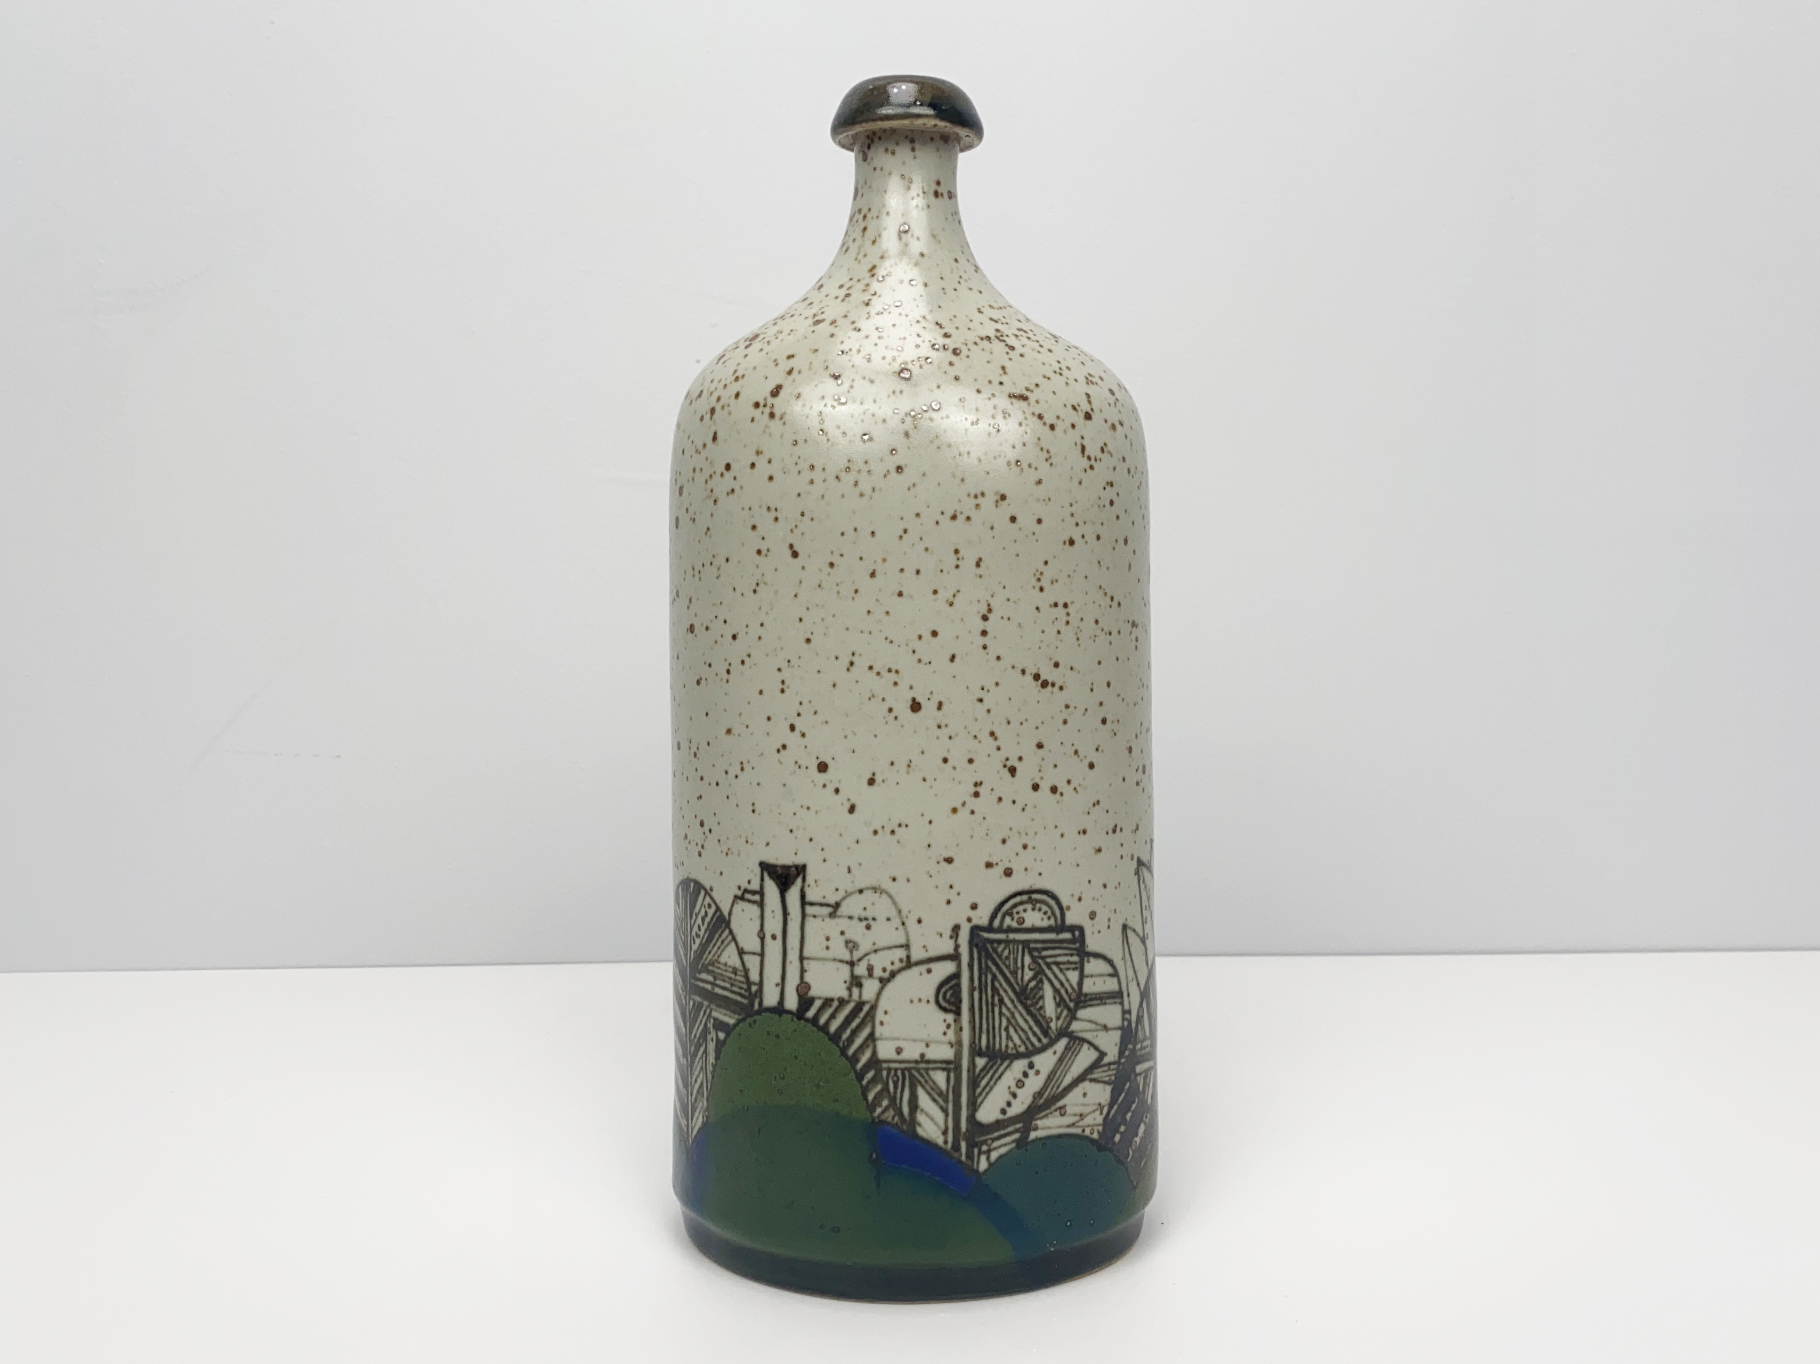 Vase, Ceramic, Stoneware, Unique Piece, abstract Landscape Painting, glazed, by Wilhelm & Elly Kuch, 1990s